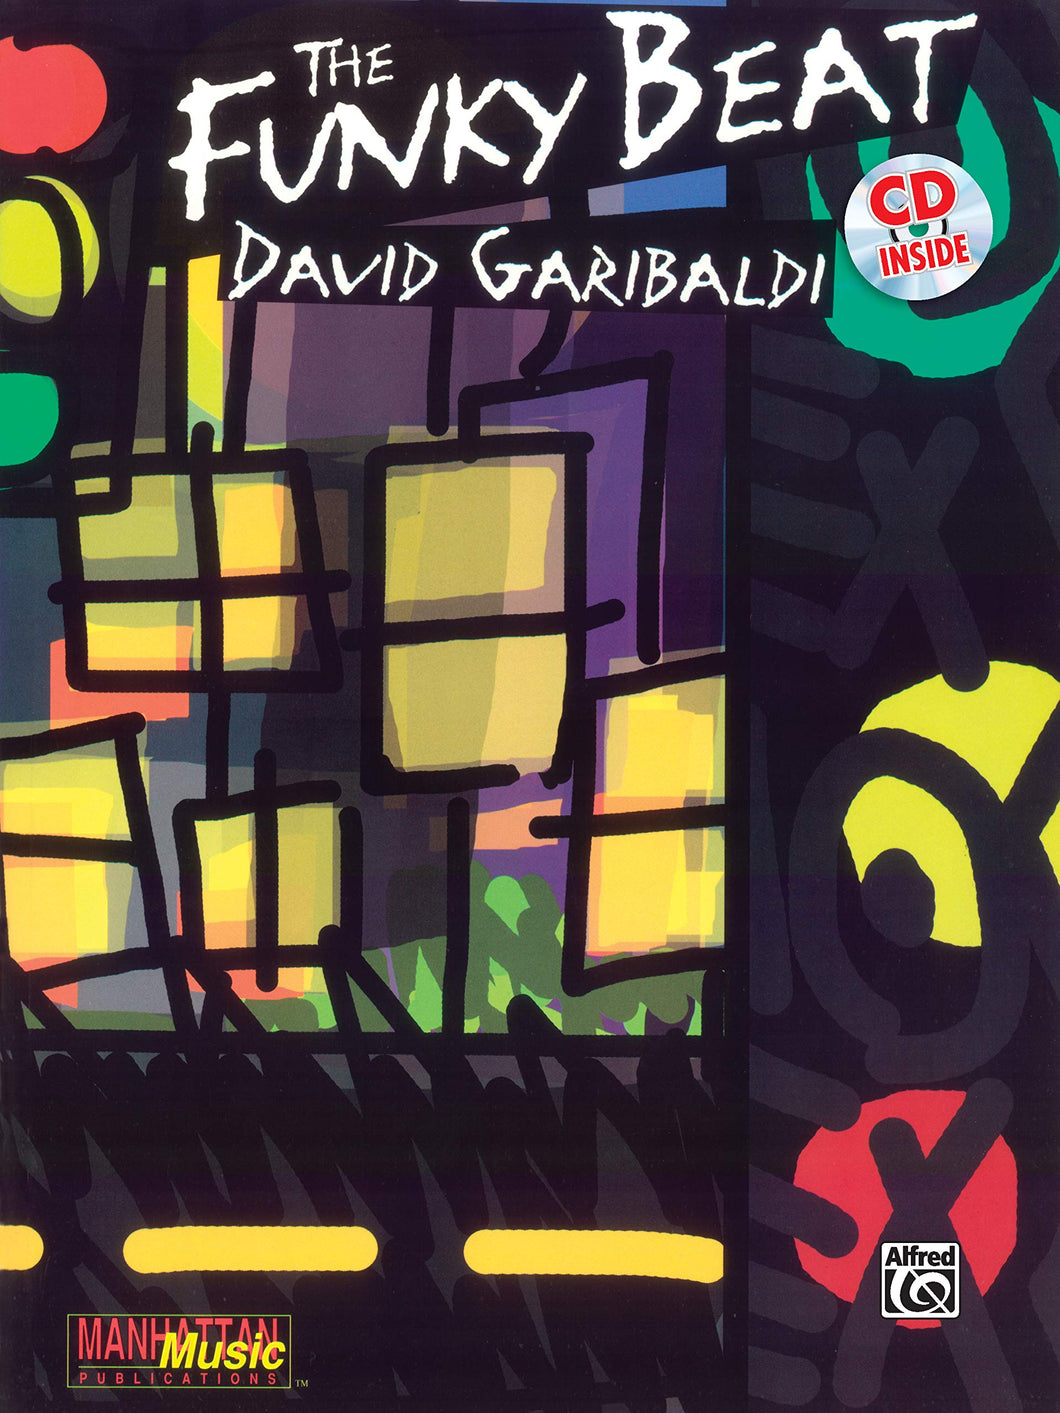 Escape from Oakland - David Garibaldi - Collection of Drum Transcriptions / Drum Sheet Music - Alfred Music TFBDG